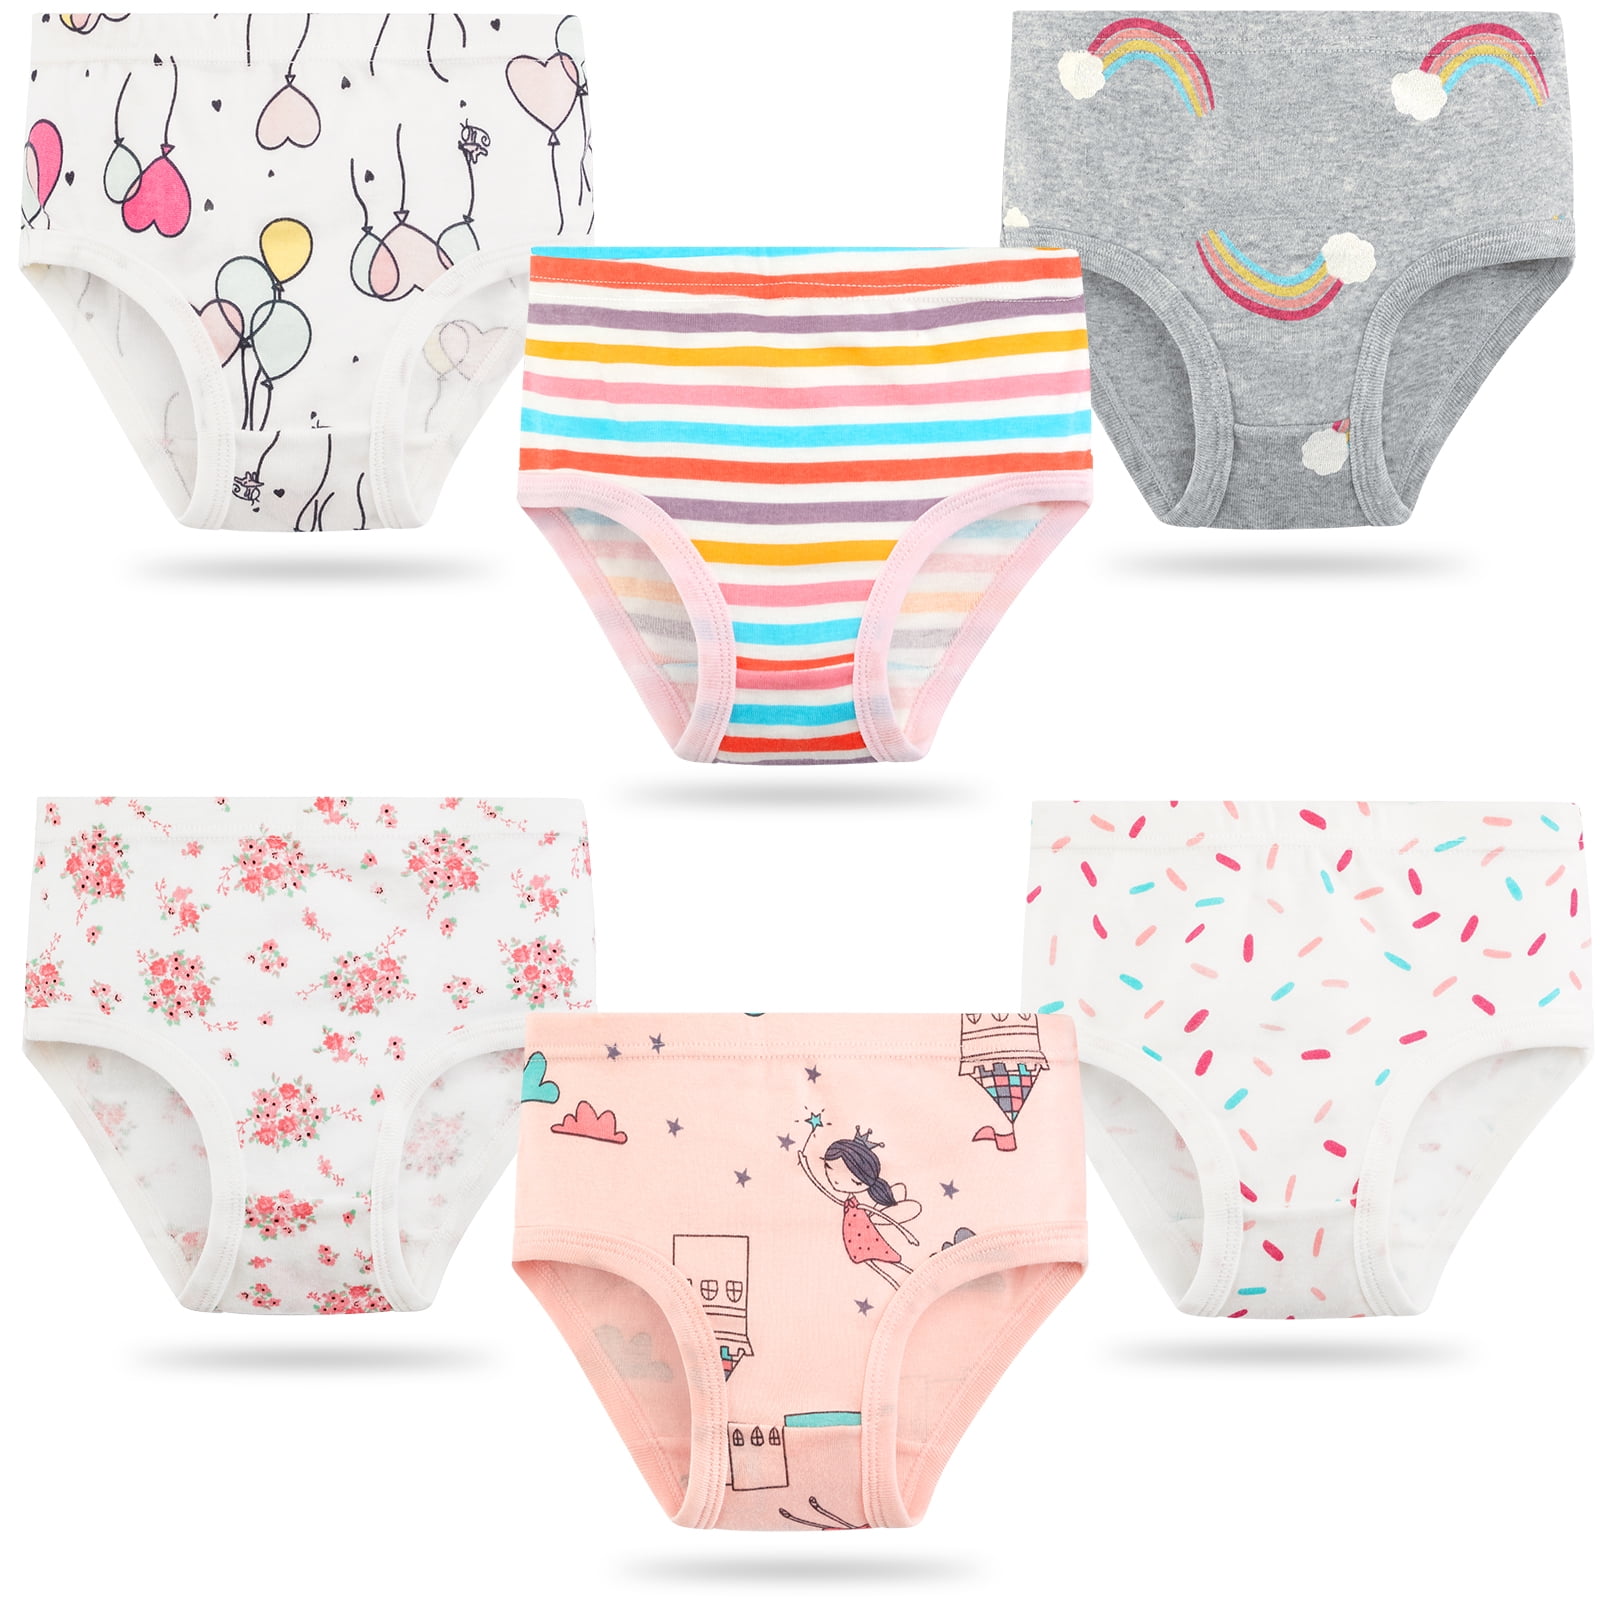 Jeccie Kids Baby Girls Lovely 100% Cotton Briefs, Soft Underwear 6-Pack,#A  for 6-7 Years